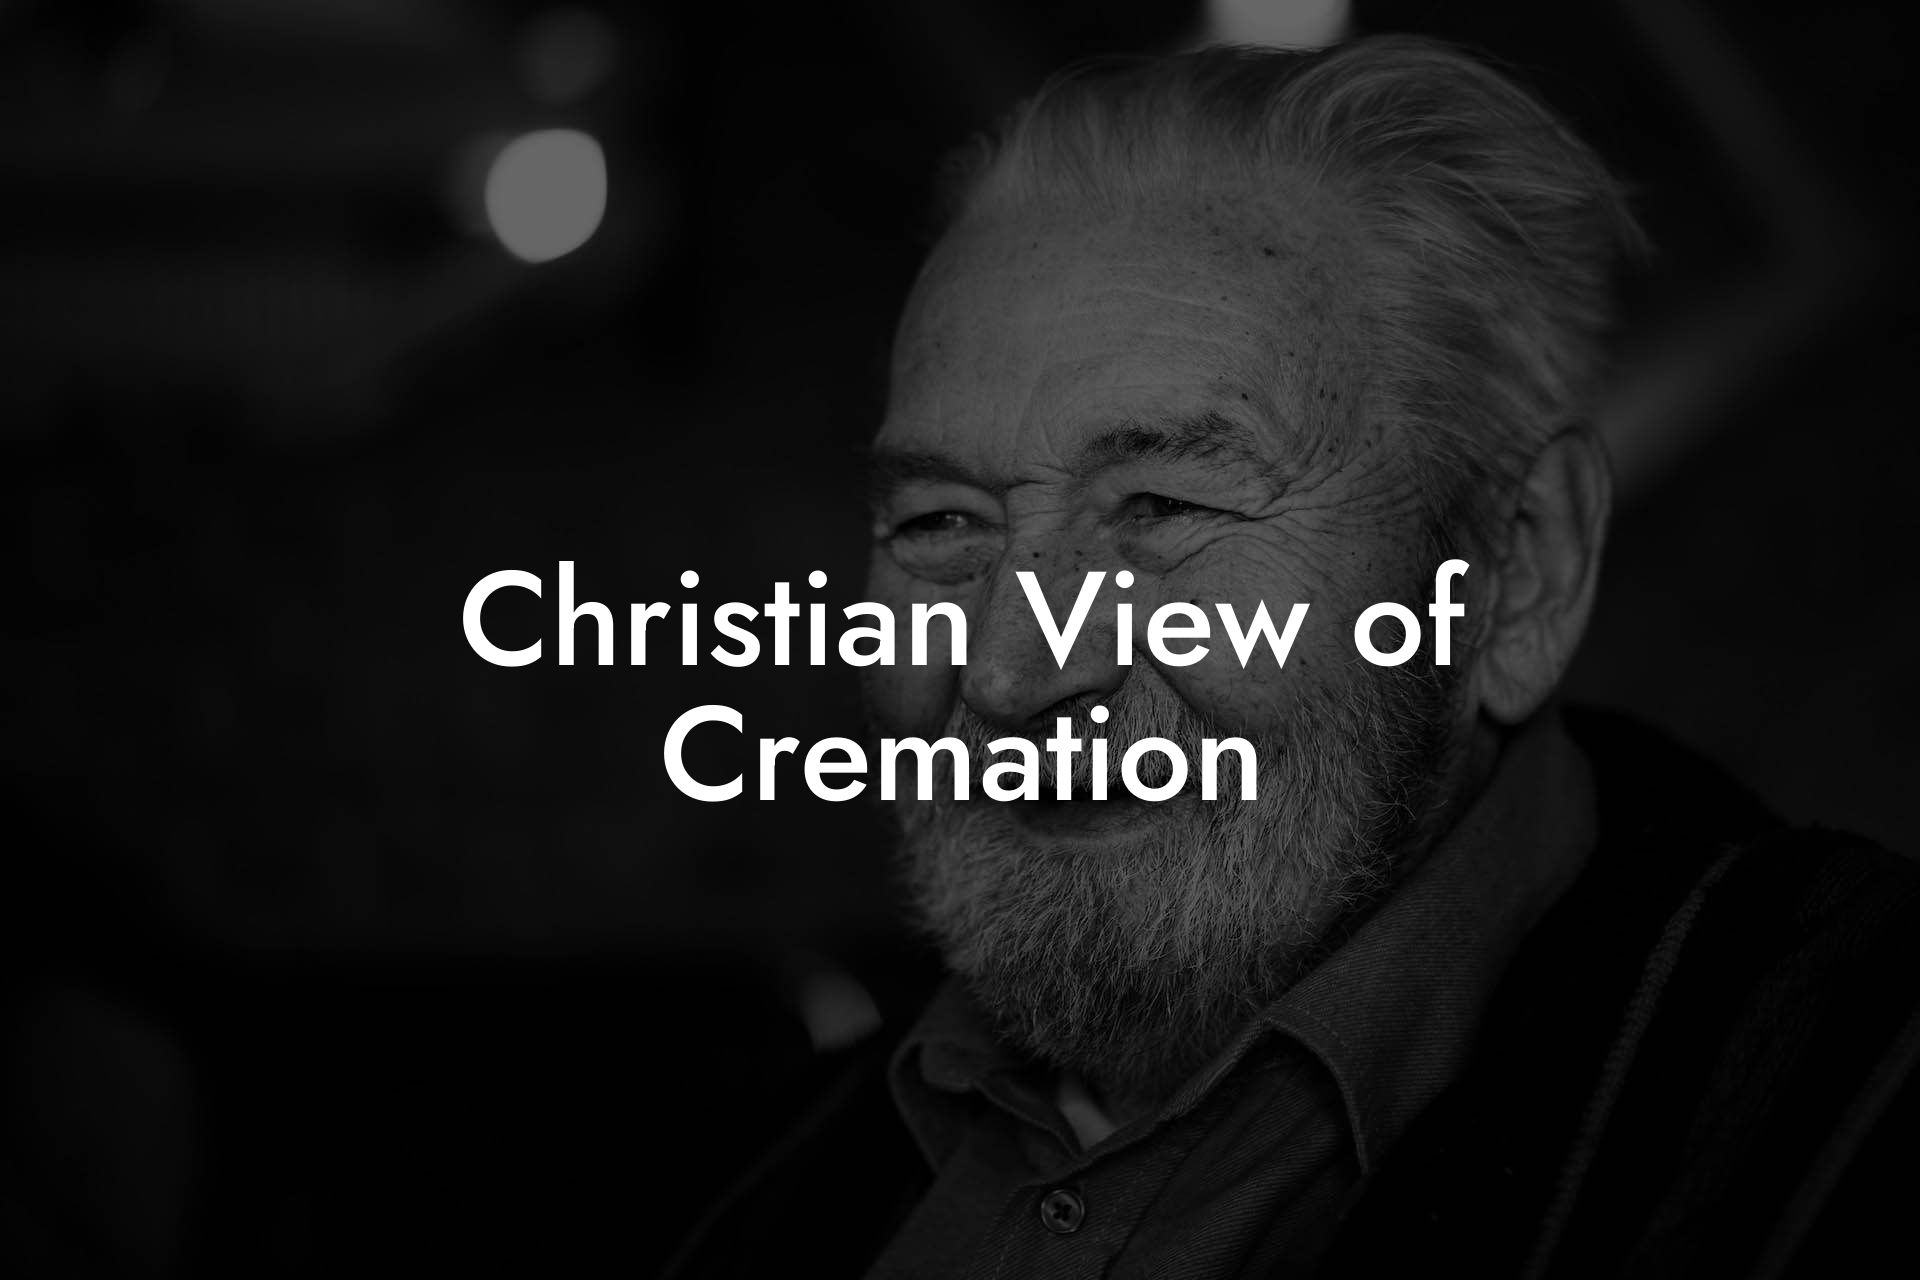 Christian View of Cremation